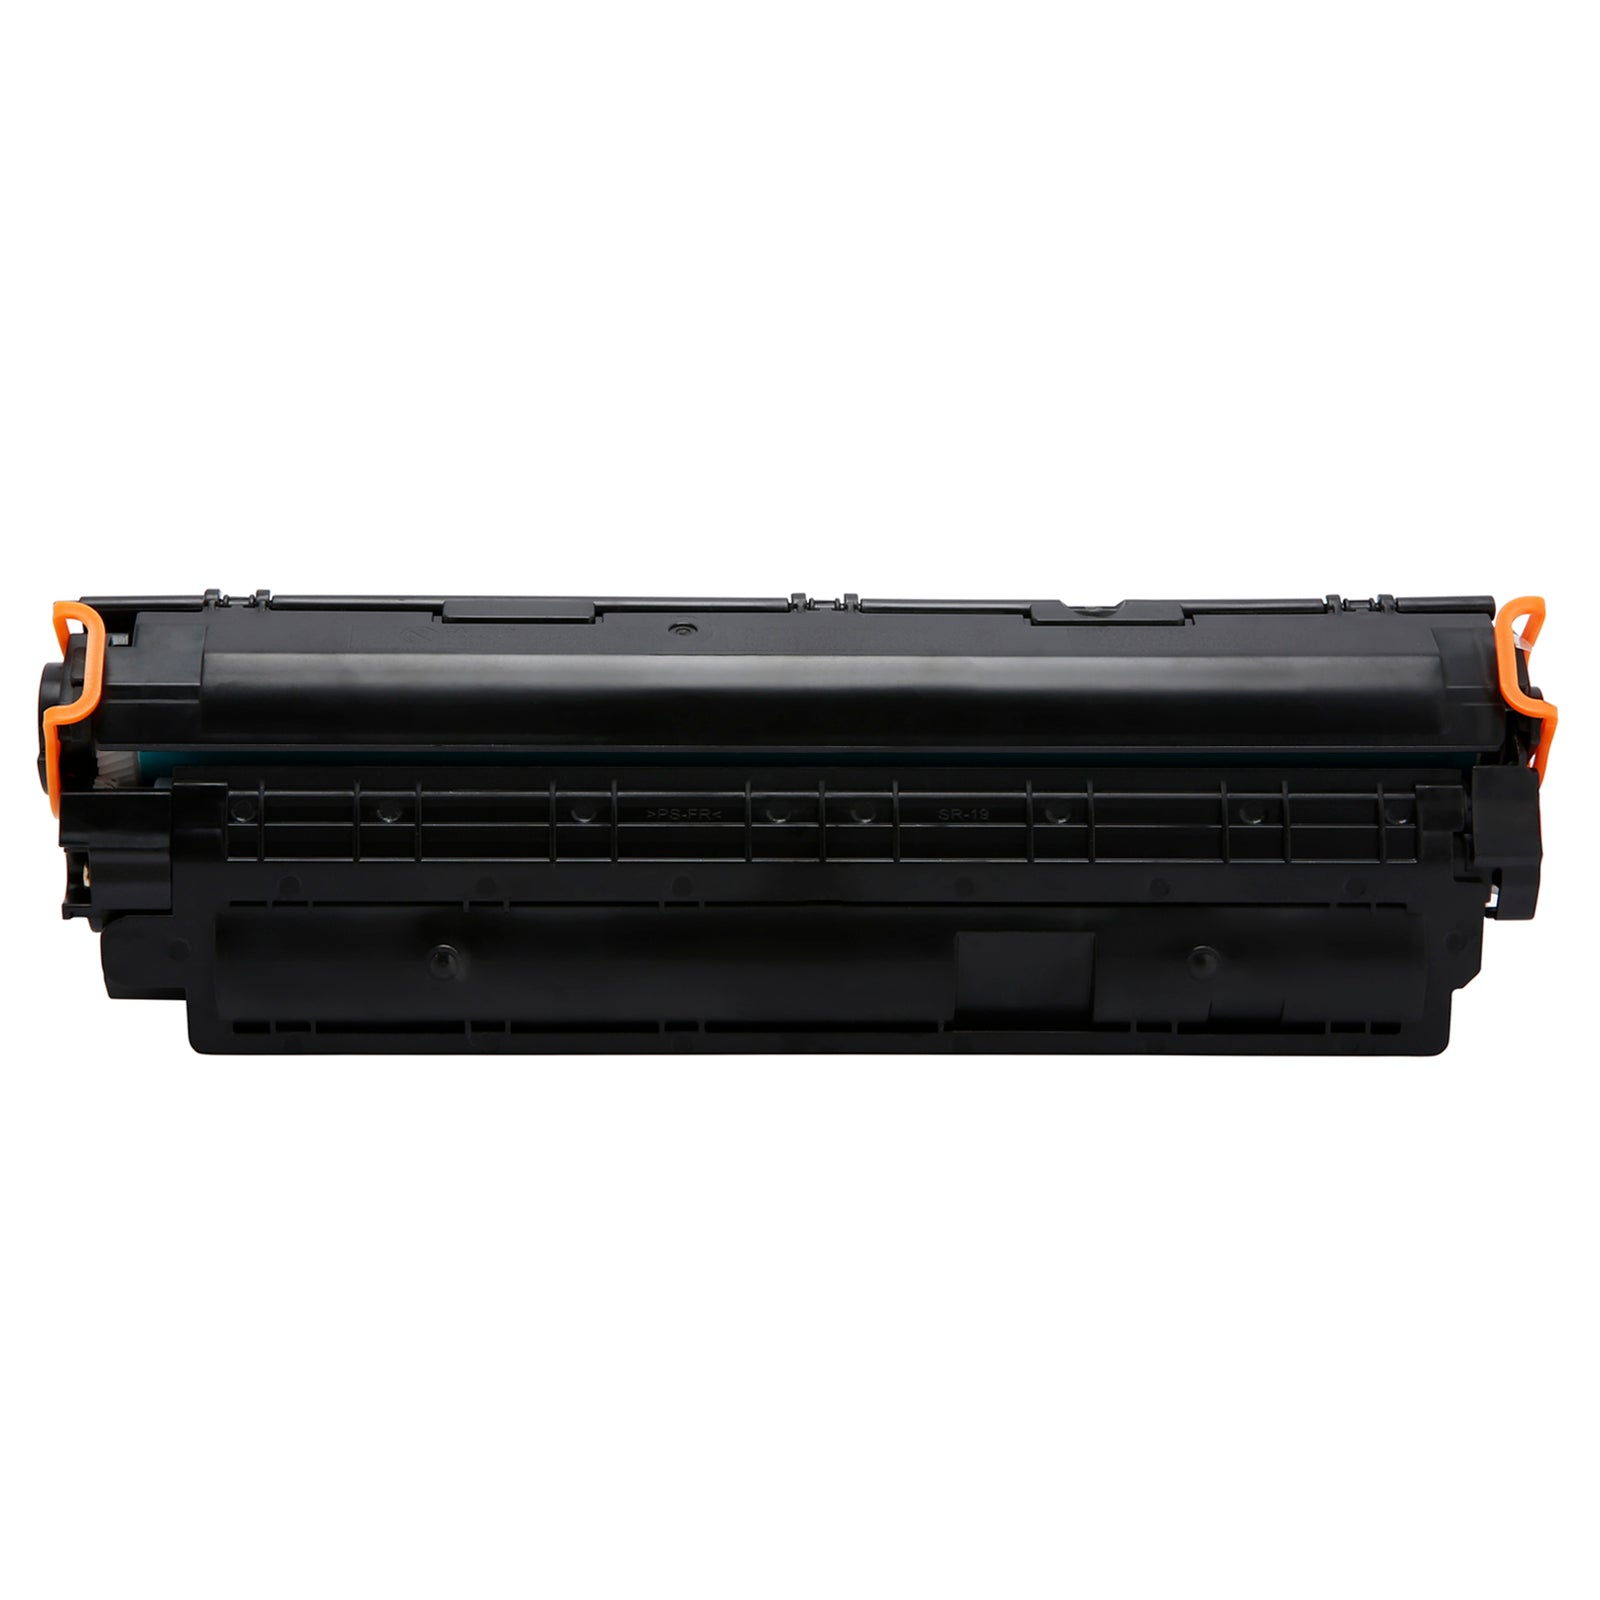 SKY 79A Toner Cartridge CF279A for HP Laserjet Pro M12 and M26 Series Printers